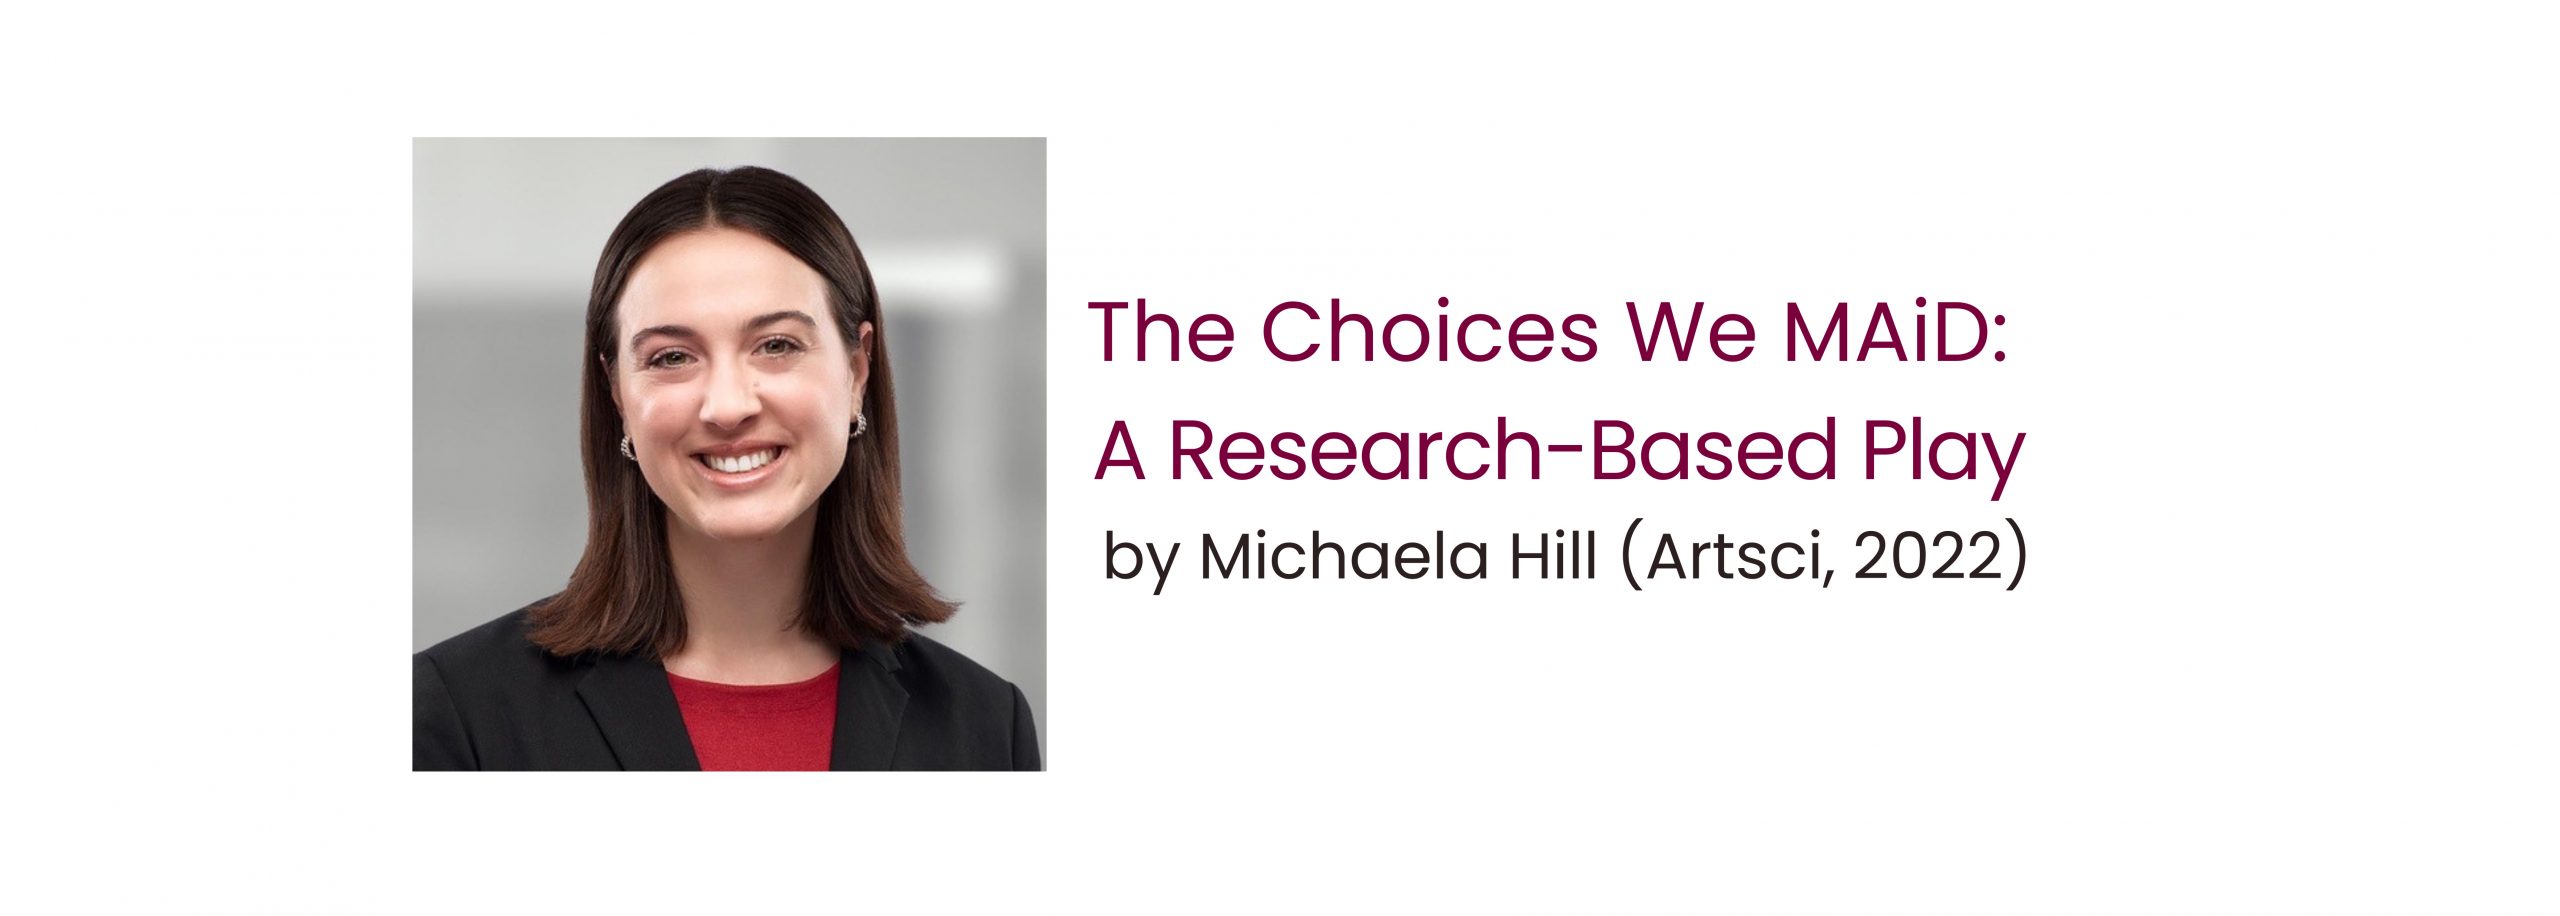 “The Choices We MAiD: A Research-Based Play” by Michaela Hill